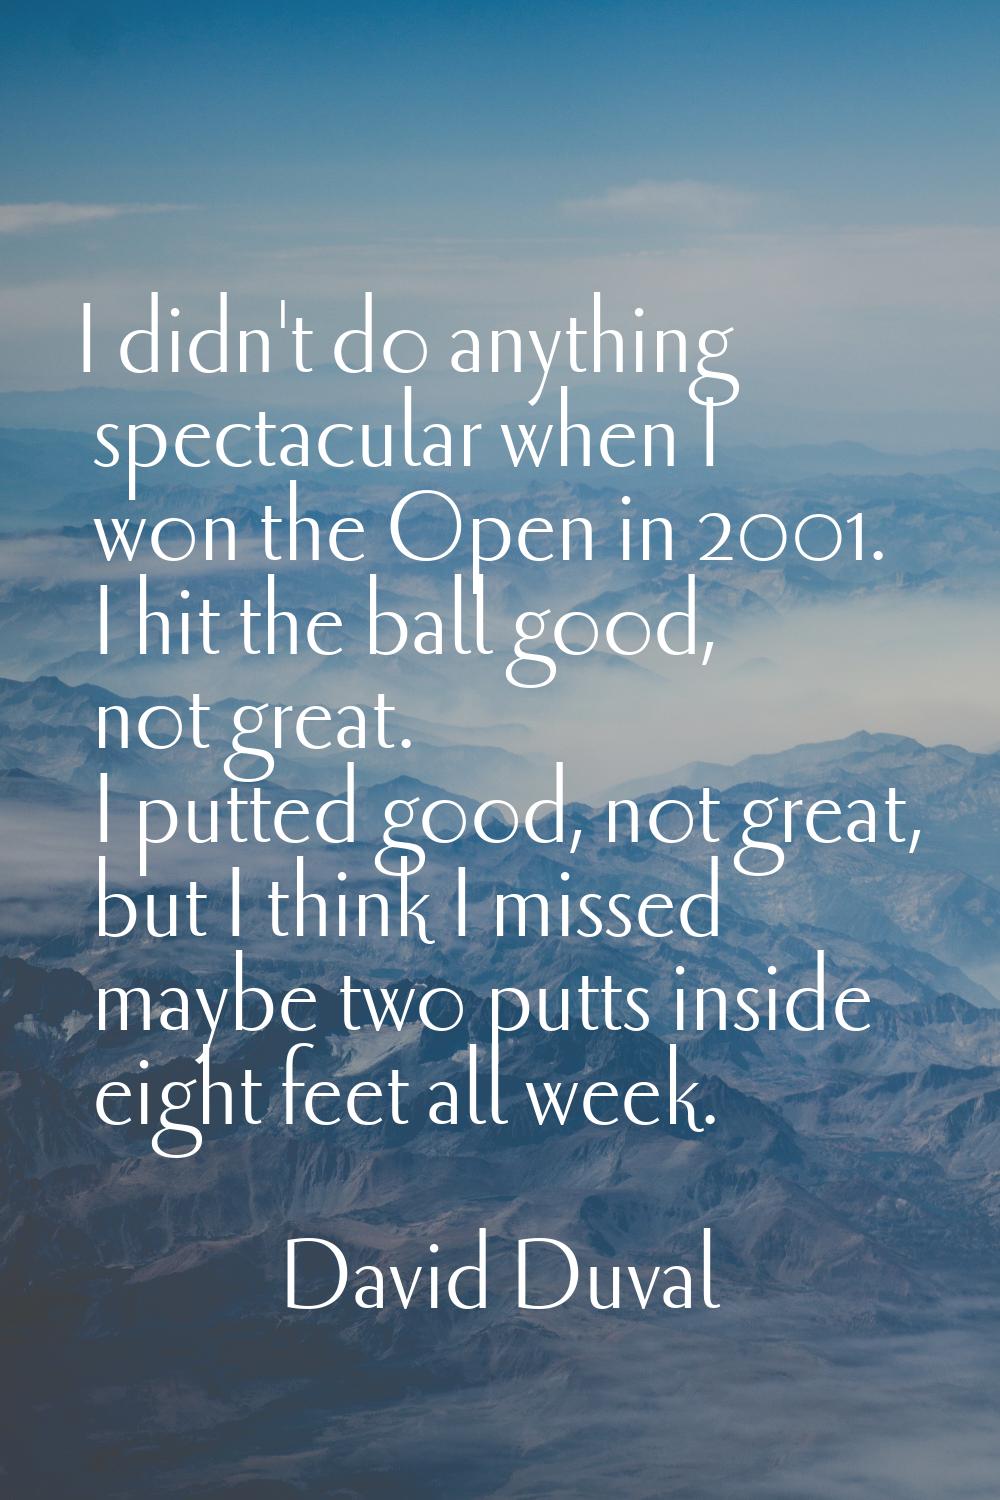 I didn't do anything spectacular when I won the Open in 2001. I hit the ball good, not great. I put